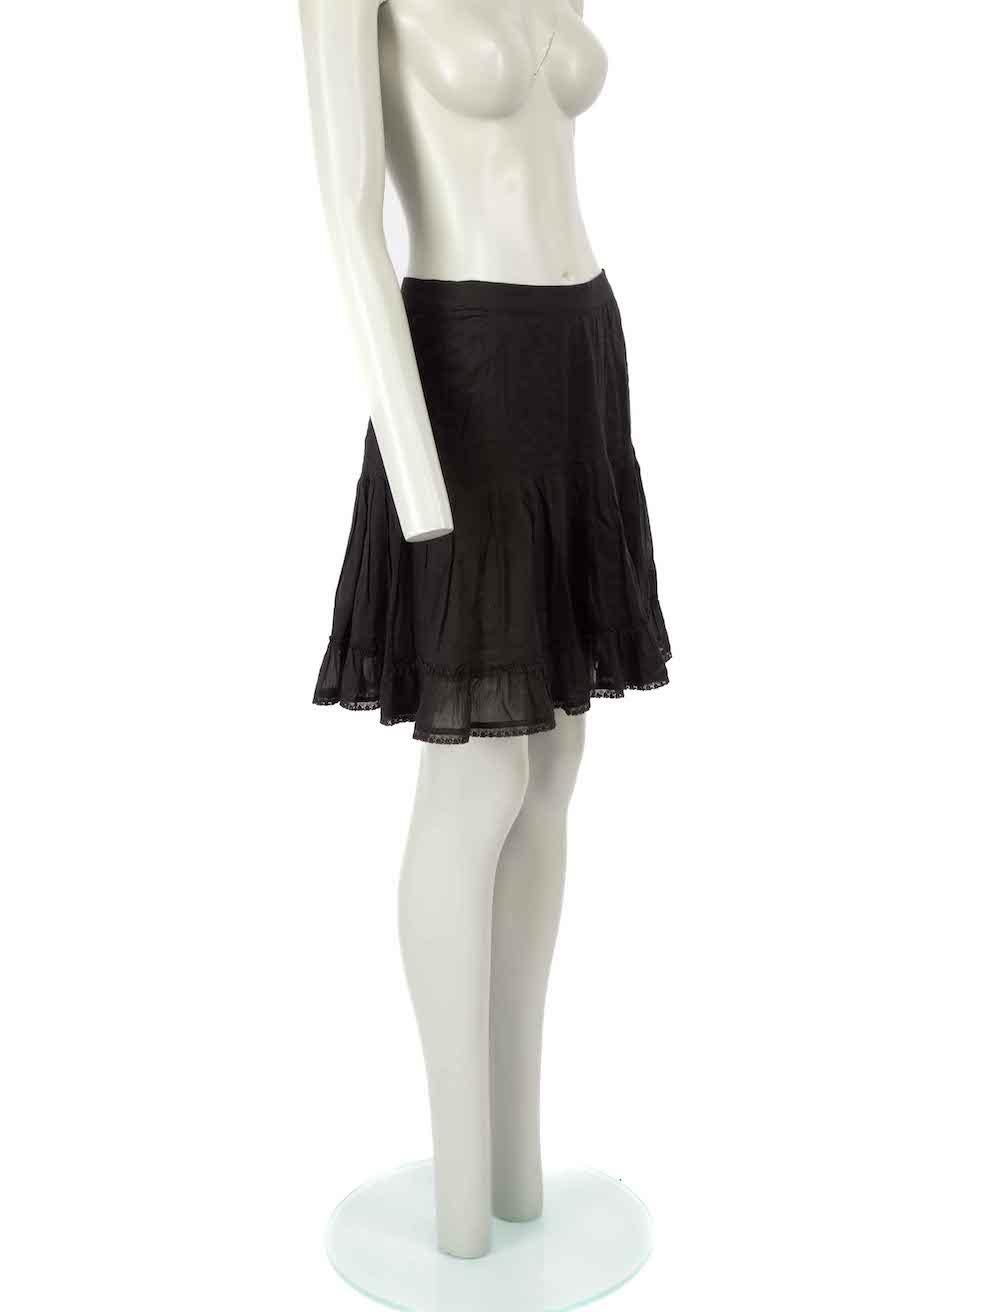 CONDITION is Very good. Minimal wear to skirt is evident. Minimal wear to stitching with a handful of stray thread ends found on this used designer Isabel Marant Étoile resale item.
 
 Details
 Black
 Cotton
 Mini skirt
 Pleated details
 Lace